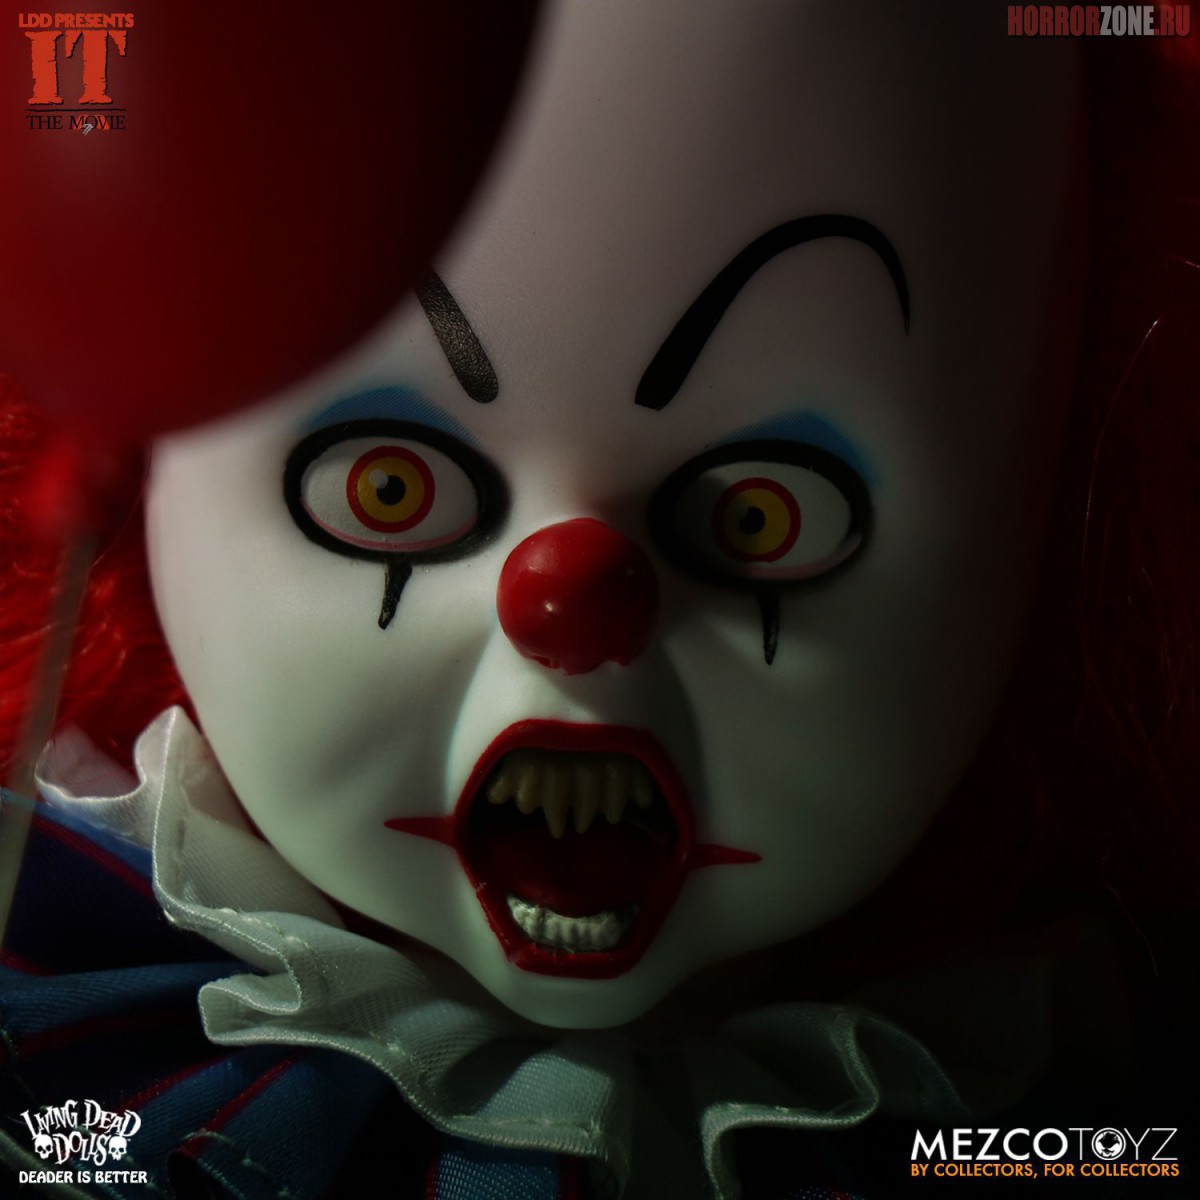 He’s Pennywise the clown, and now he’s a Living Dead Doll